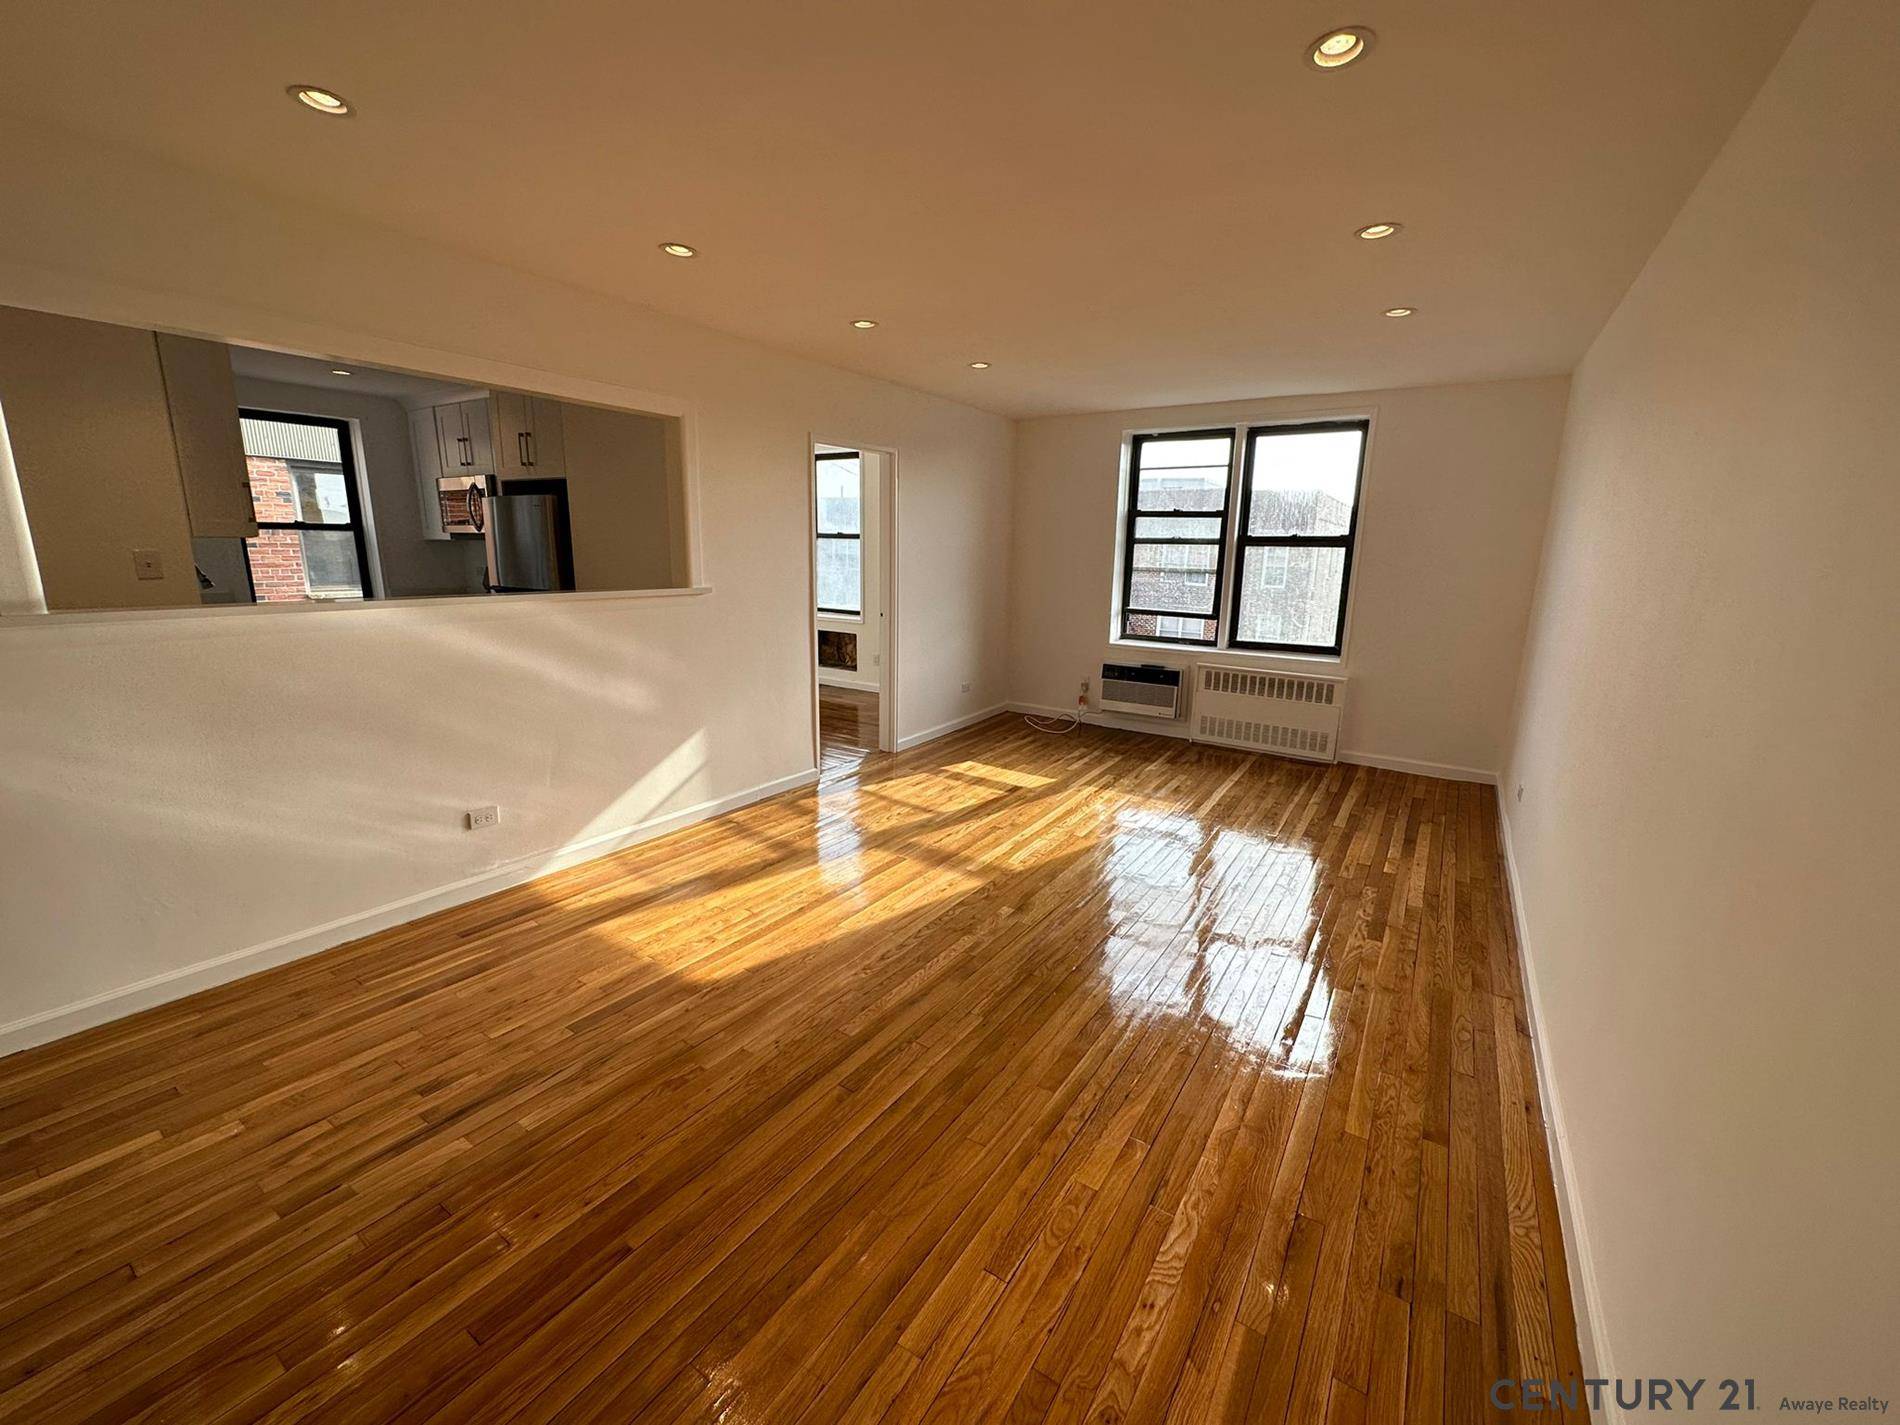 Incredible newly renovated 2 bedroom apartment situated in a well maintained co op building in the HEART of Bay Ridge !